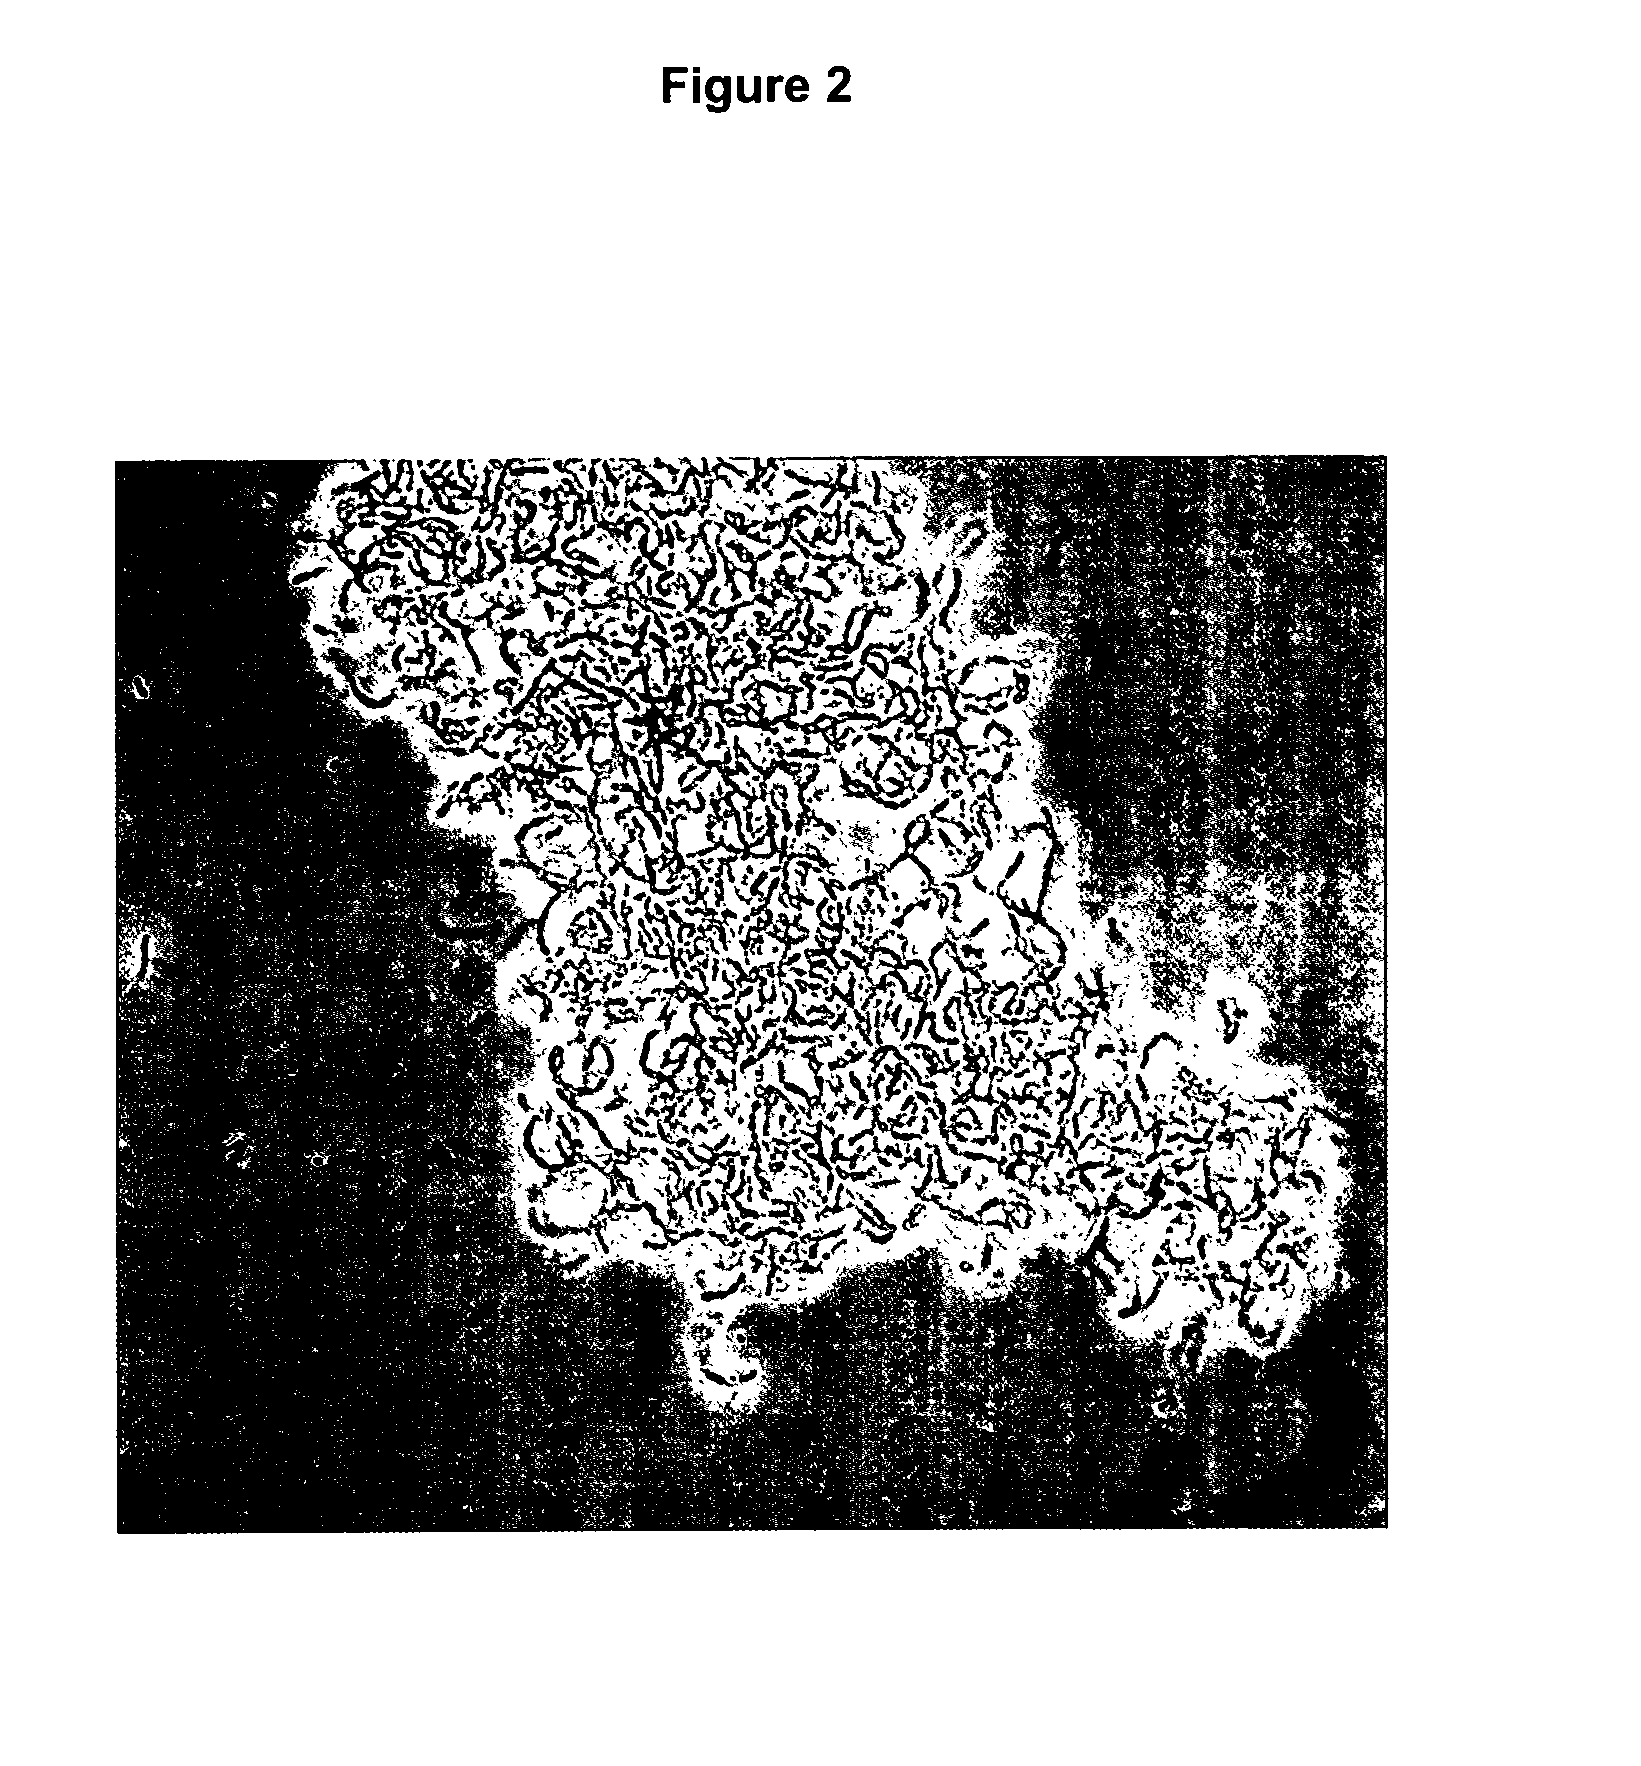 Microorganism of the genus Lactobacillus capable of binding to S. mutans and compositions comprising the same